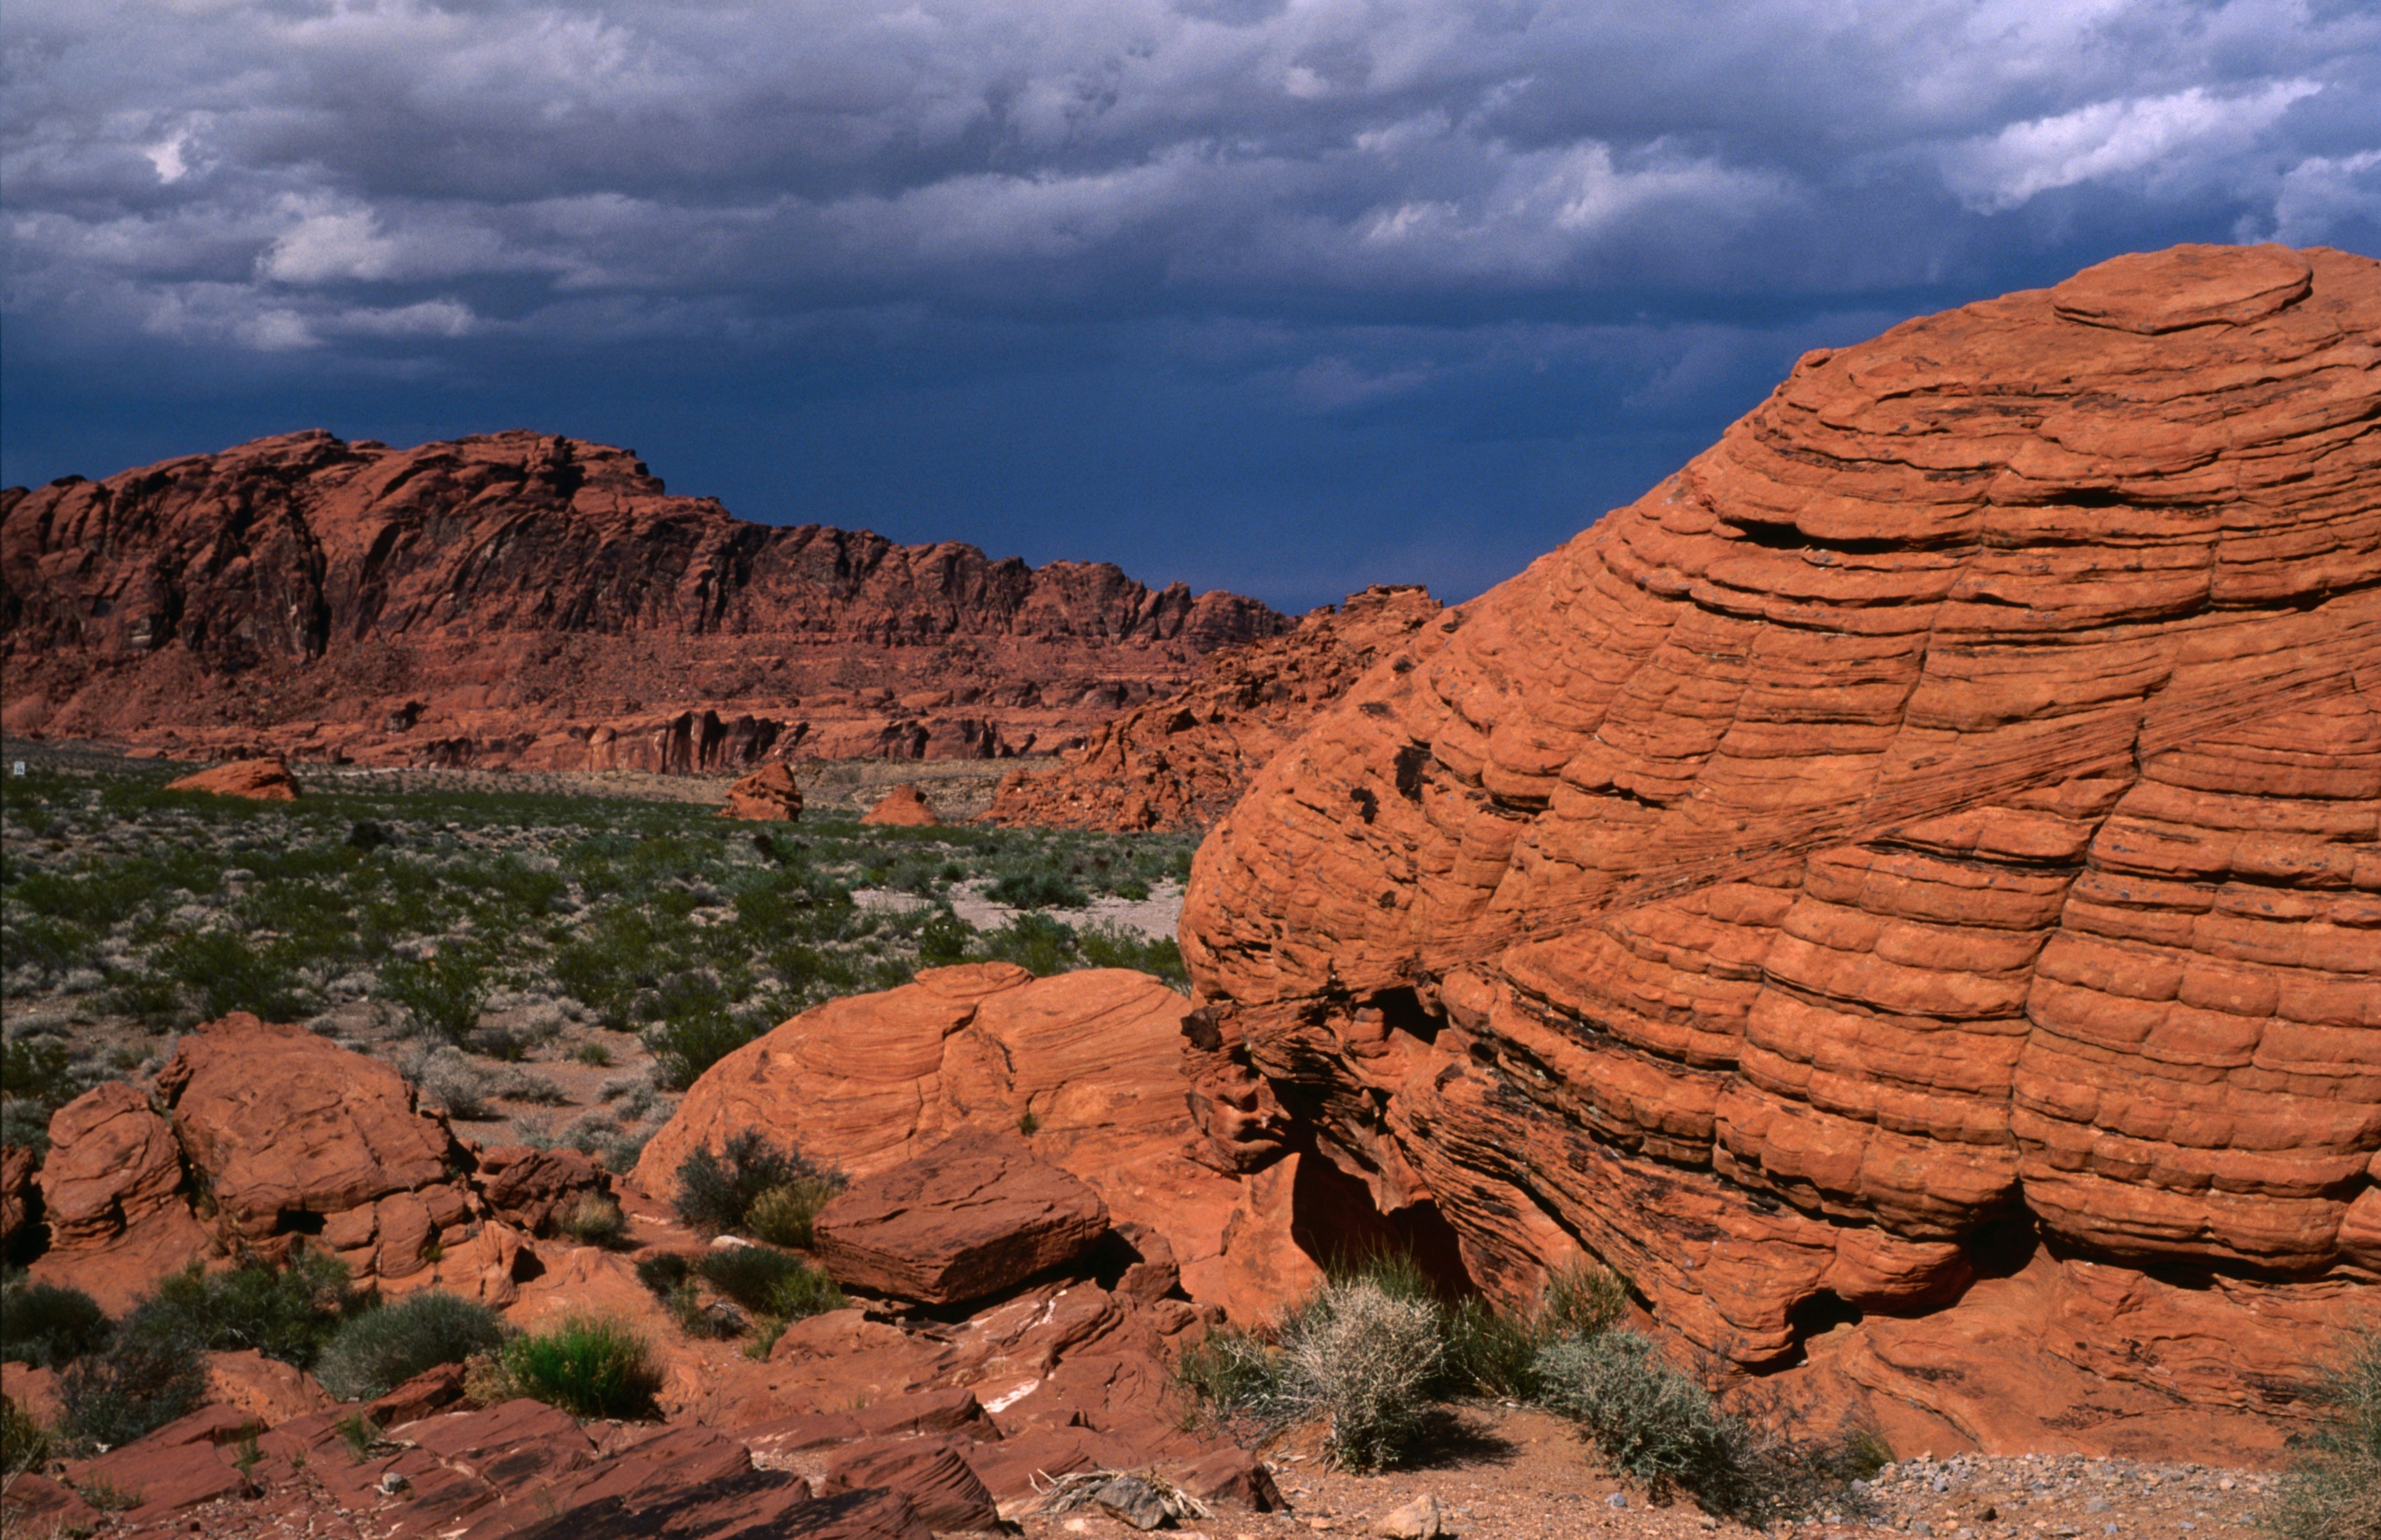 Red sandstone rock formations eroded into dome shapes